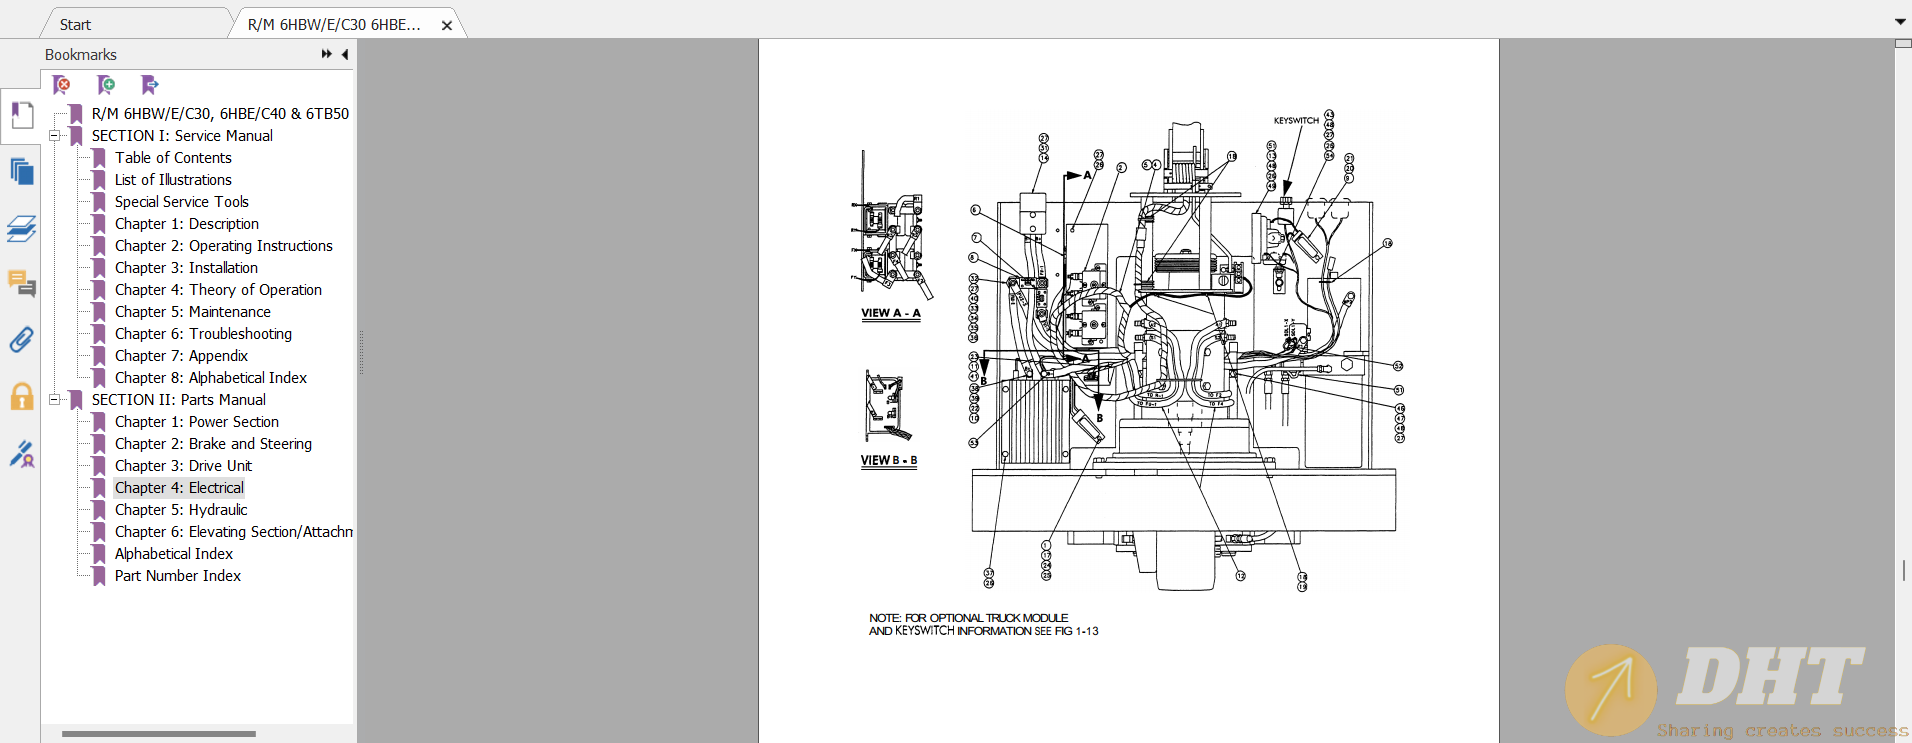 Toyota Forklift workshop manual  and Space Part Catalog-11.png